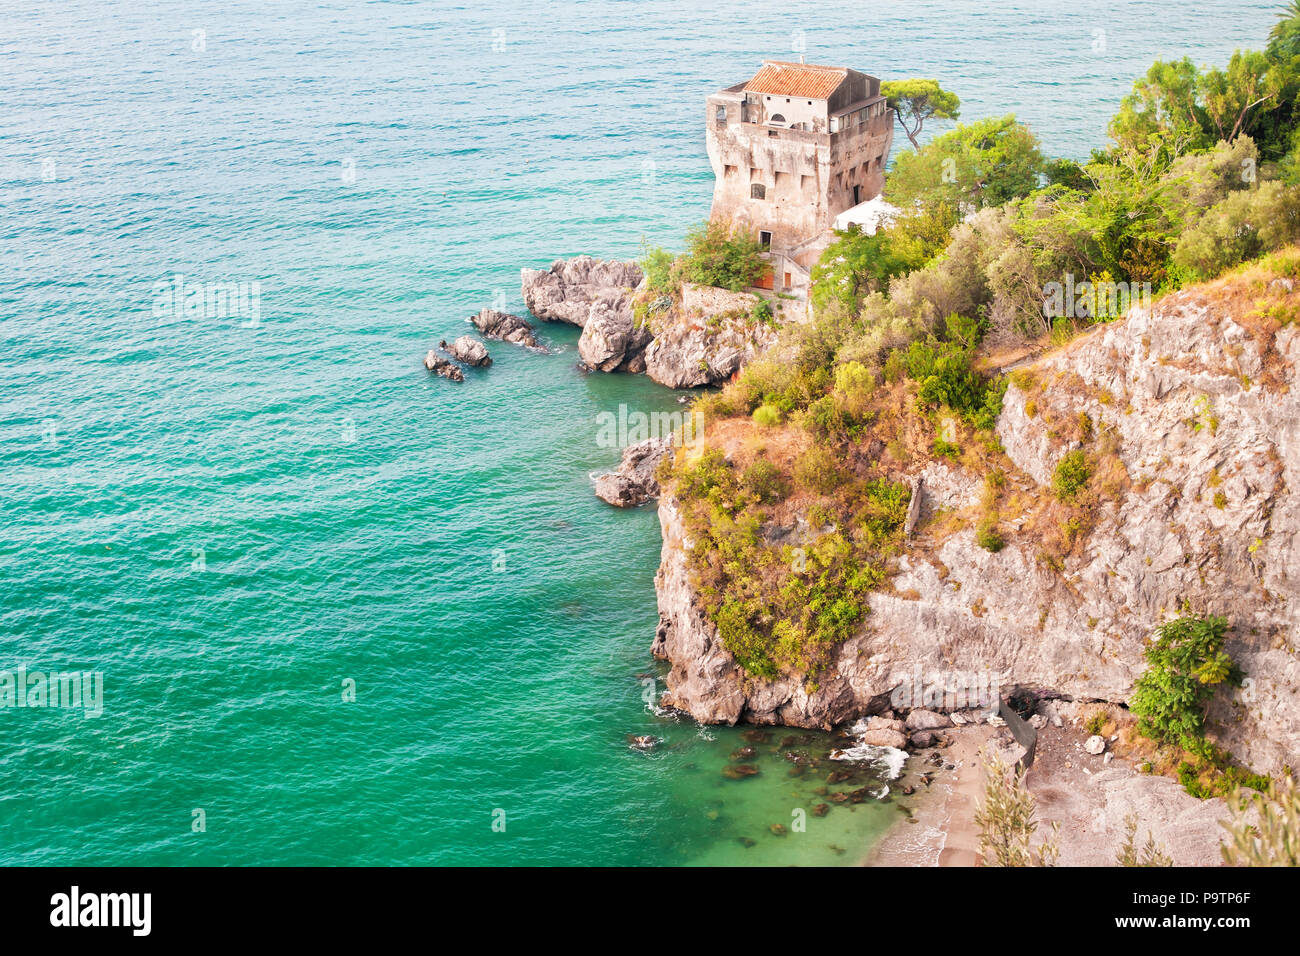 view of old medieval fort tower on rocks by Mediterranean sea near Vietri Sul Mare, Salerno, Amalfi coast, Campania province, taly Stock Photo